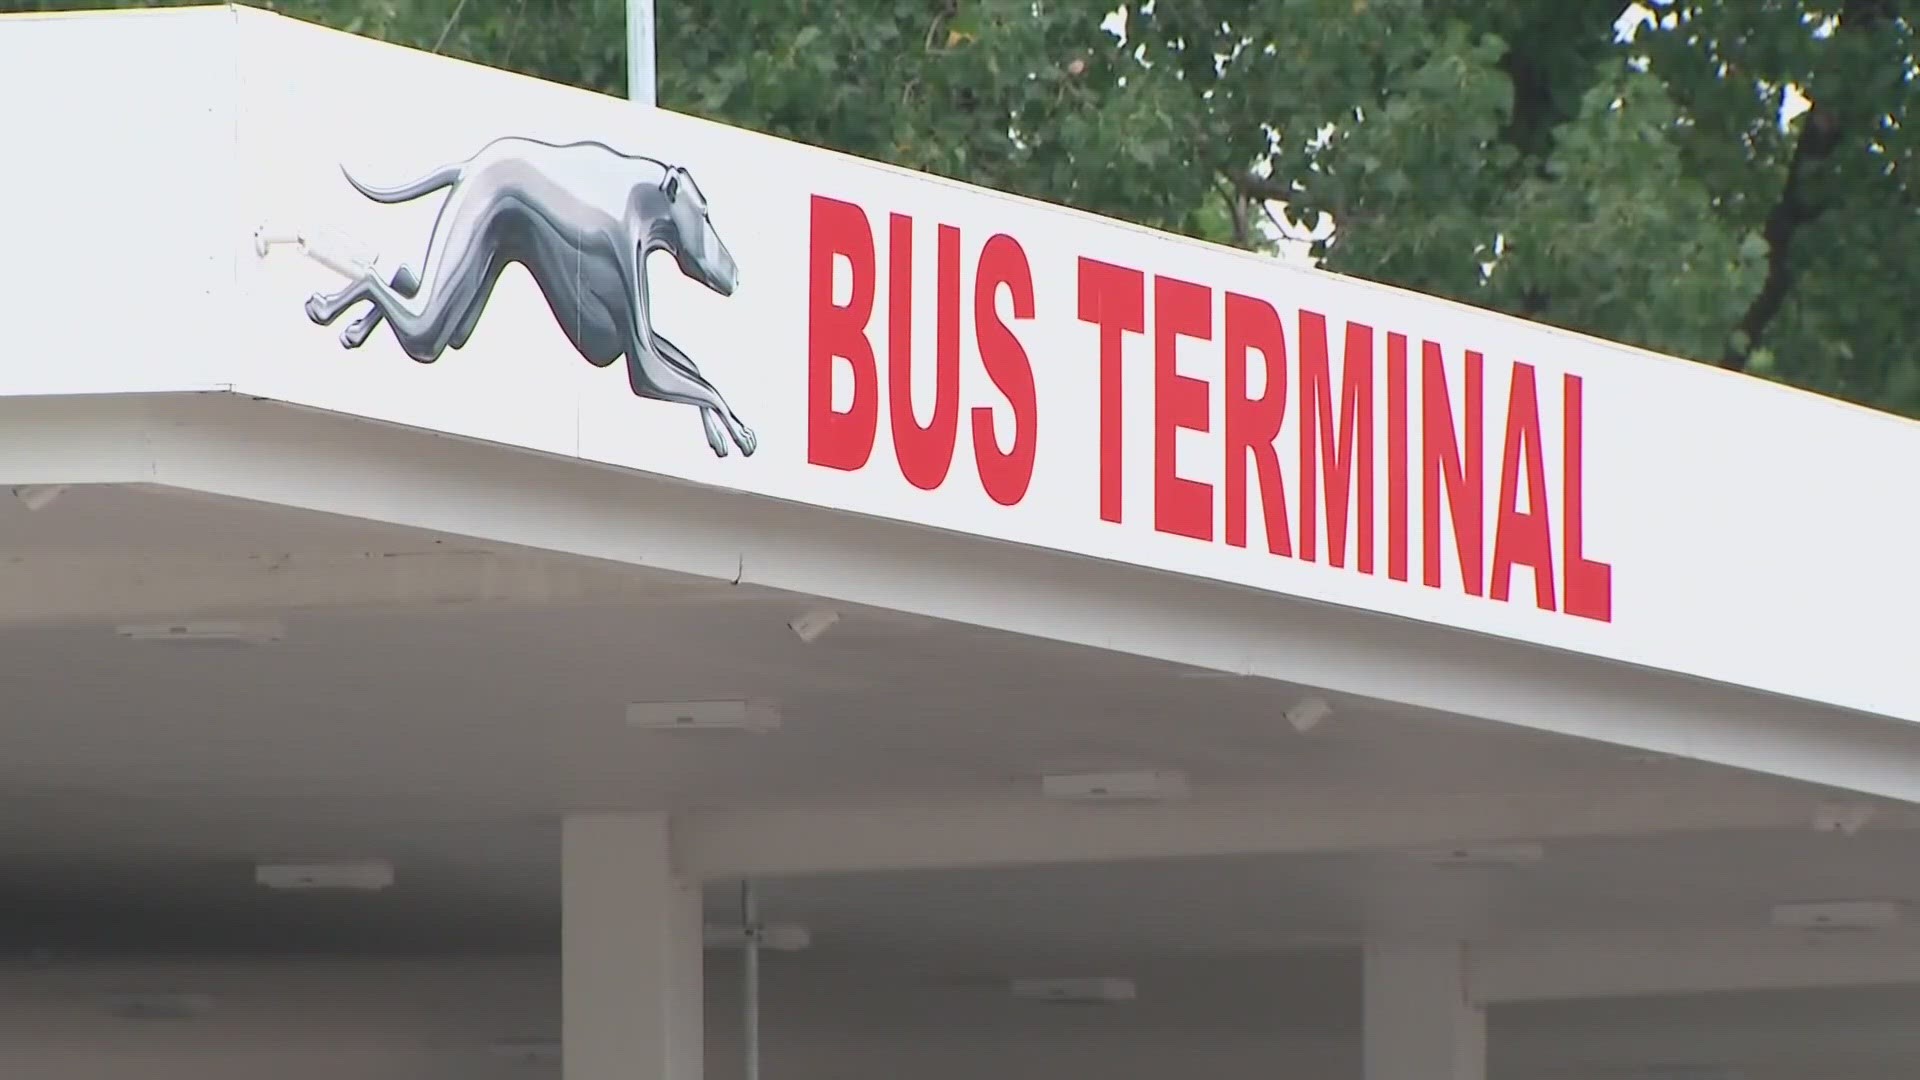 The Greyhound bus station on North Wilson Road has been a center for violent crime since it opened over the summer.